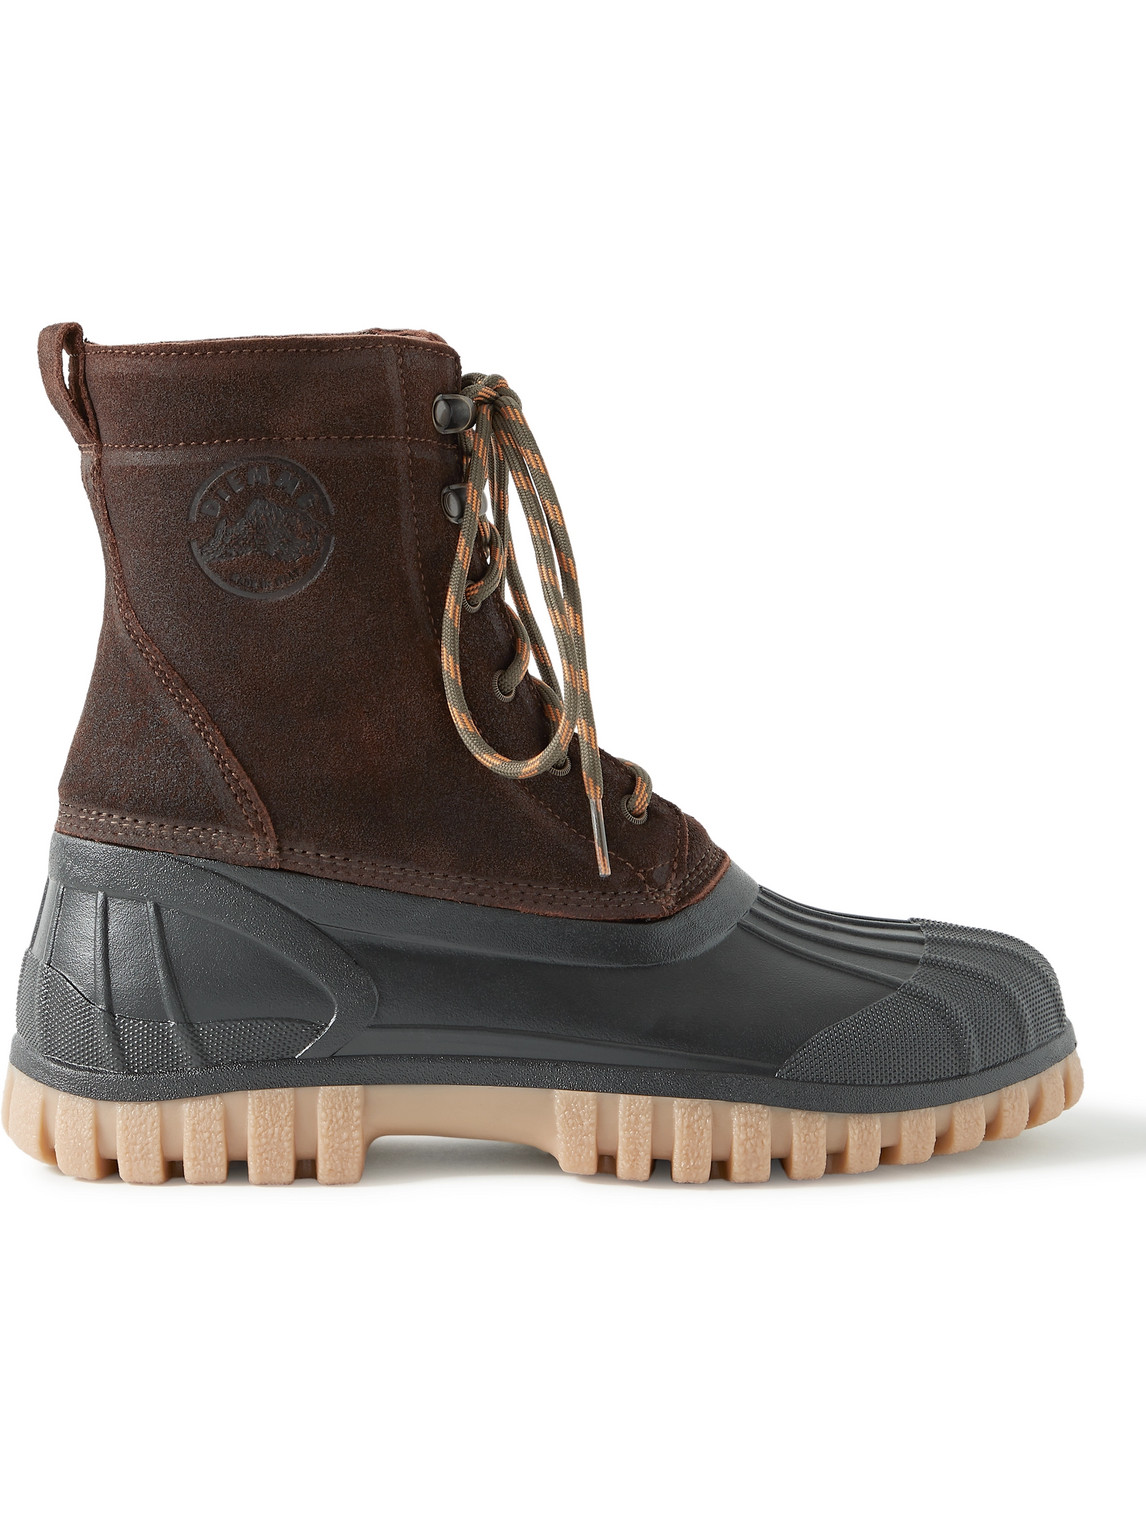 DIEMME ANATRA RUBBER AND SUEDE DUCK BOOT